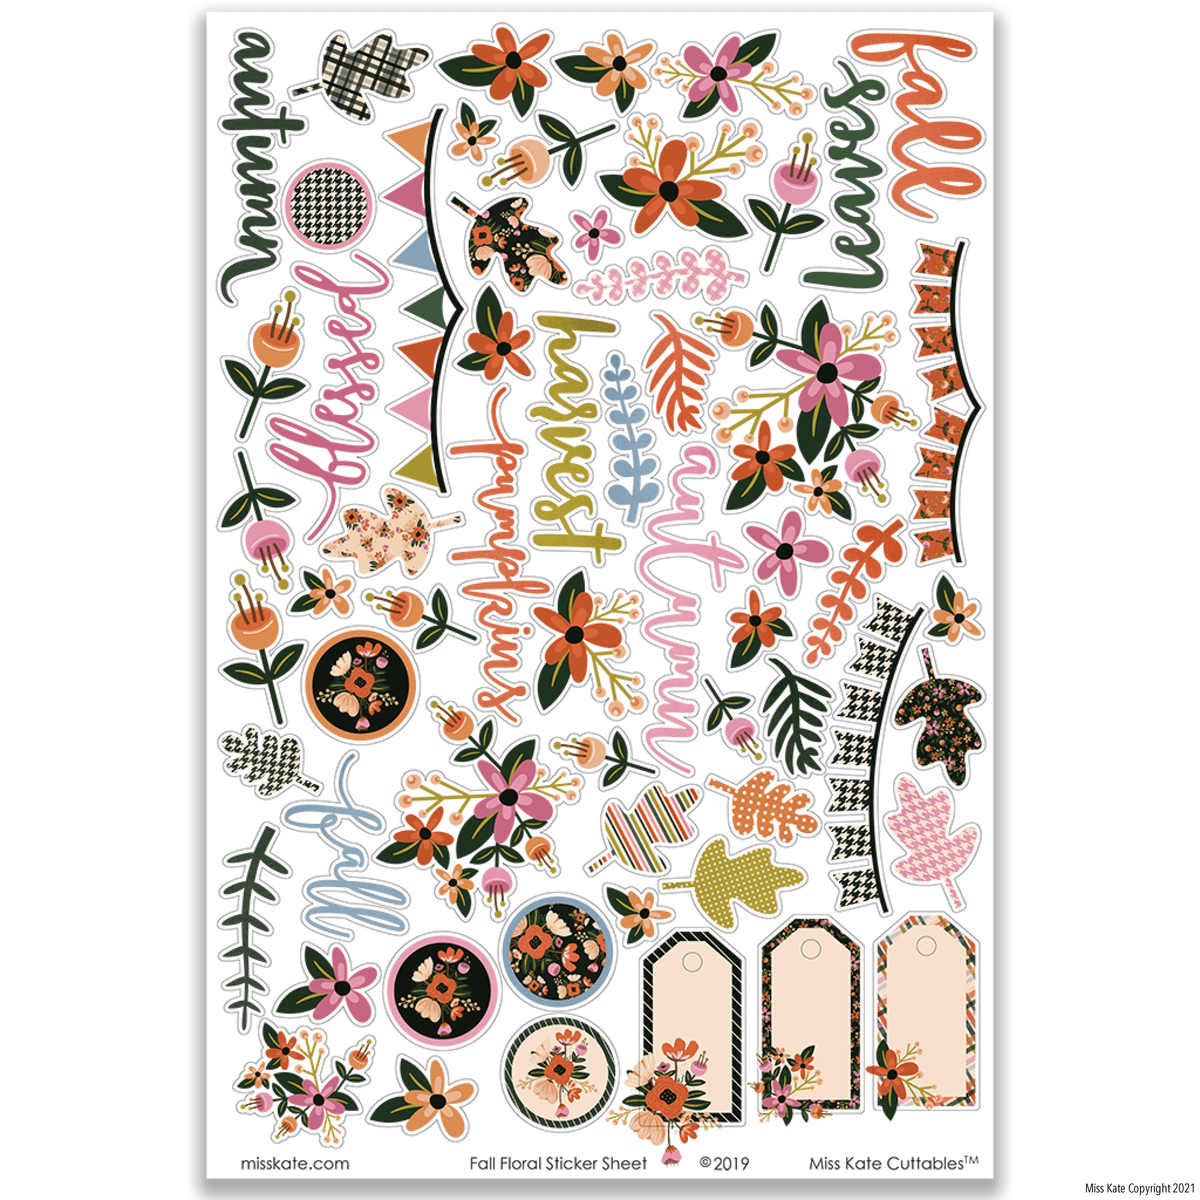 Fall Flowers Stickers – Paper Hearts Planner Co.